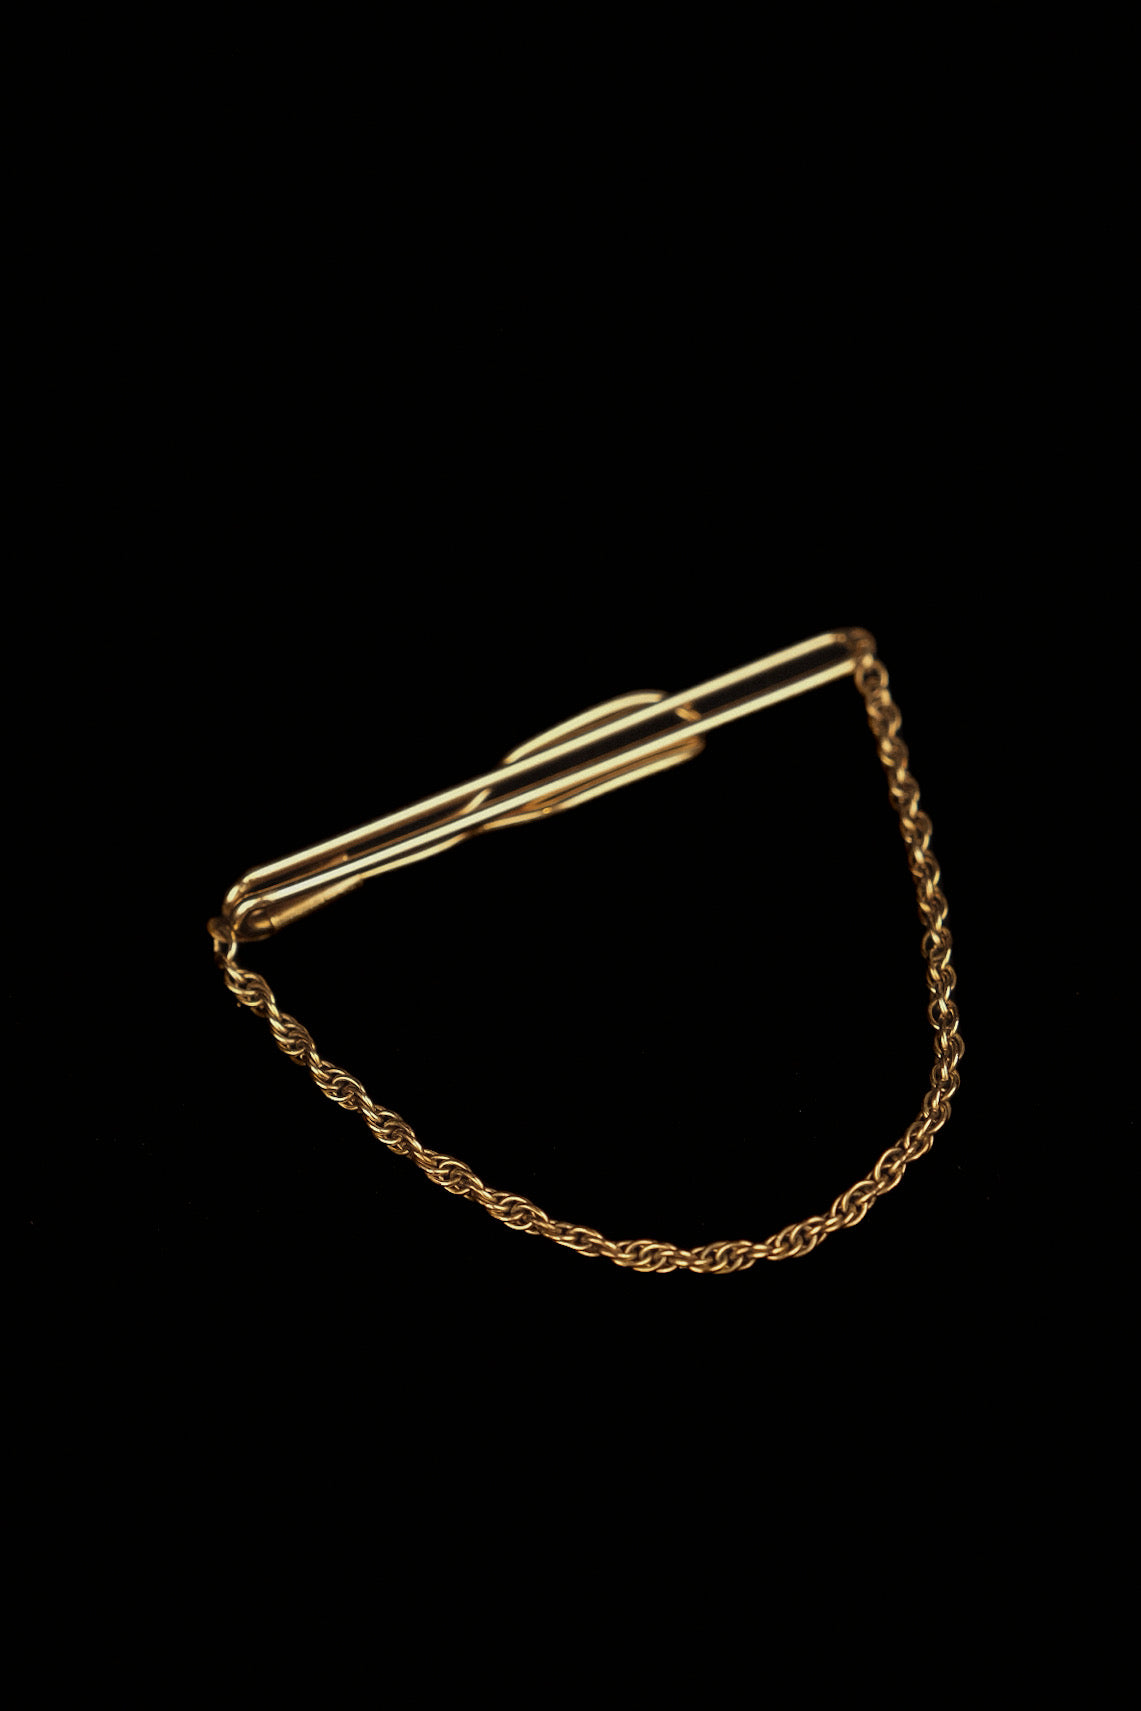 12K Gold Filled Tie Bar With Decorative Chain